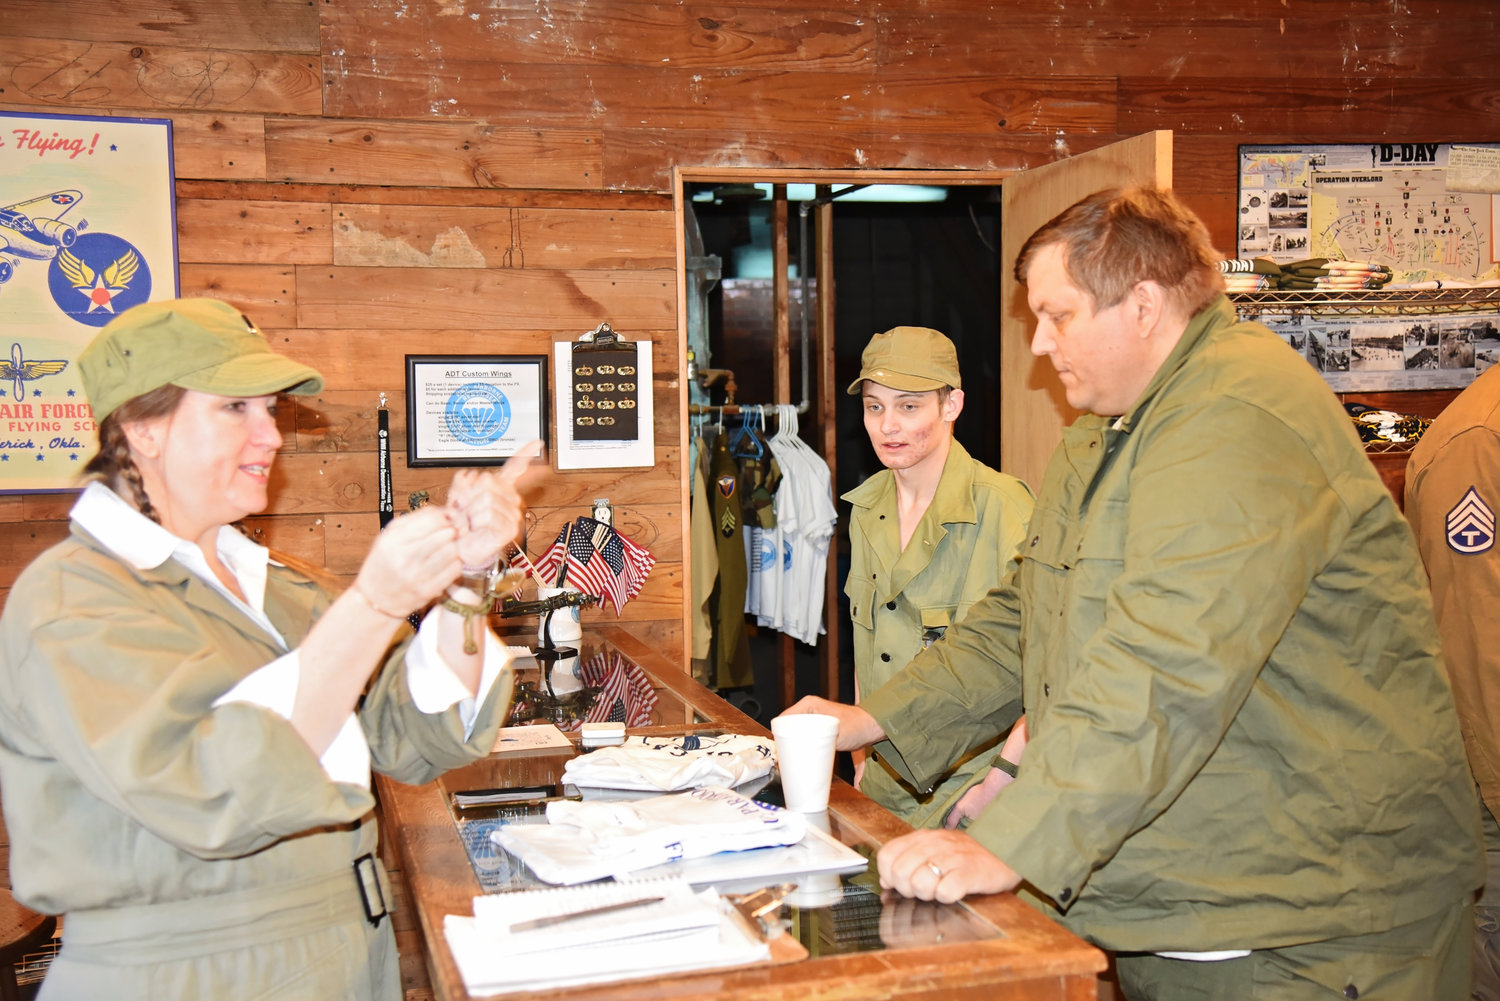 WWII Airborne Demonstration Team member Laura Goodwin makes a sale at the PX (gift shop) to visitors Carter Cavicchio from Oklahoma City (left) and Dustin Roderigas (right) from Lawton.